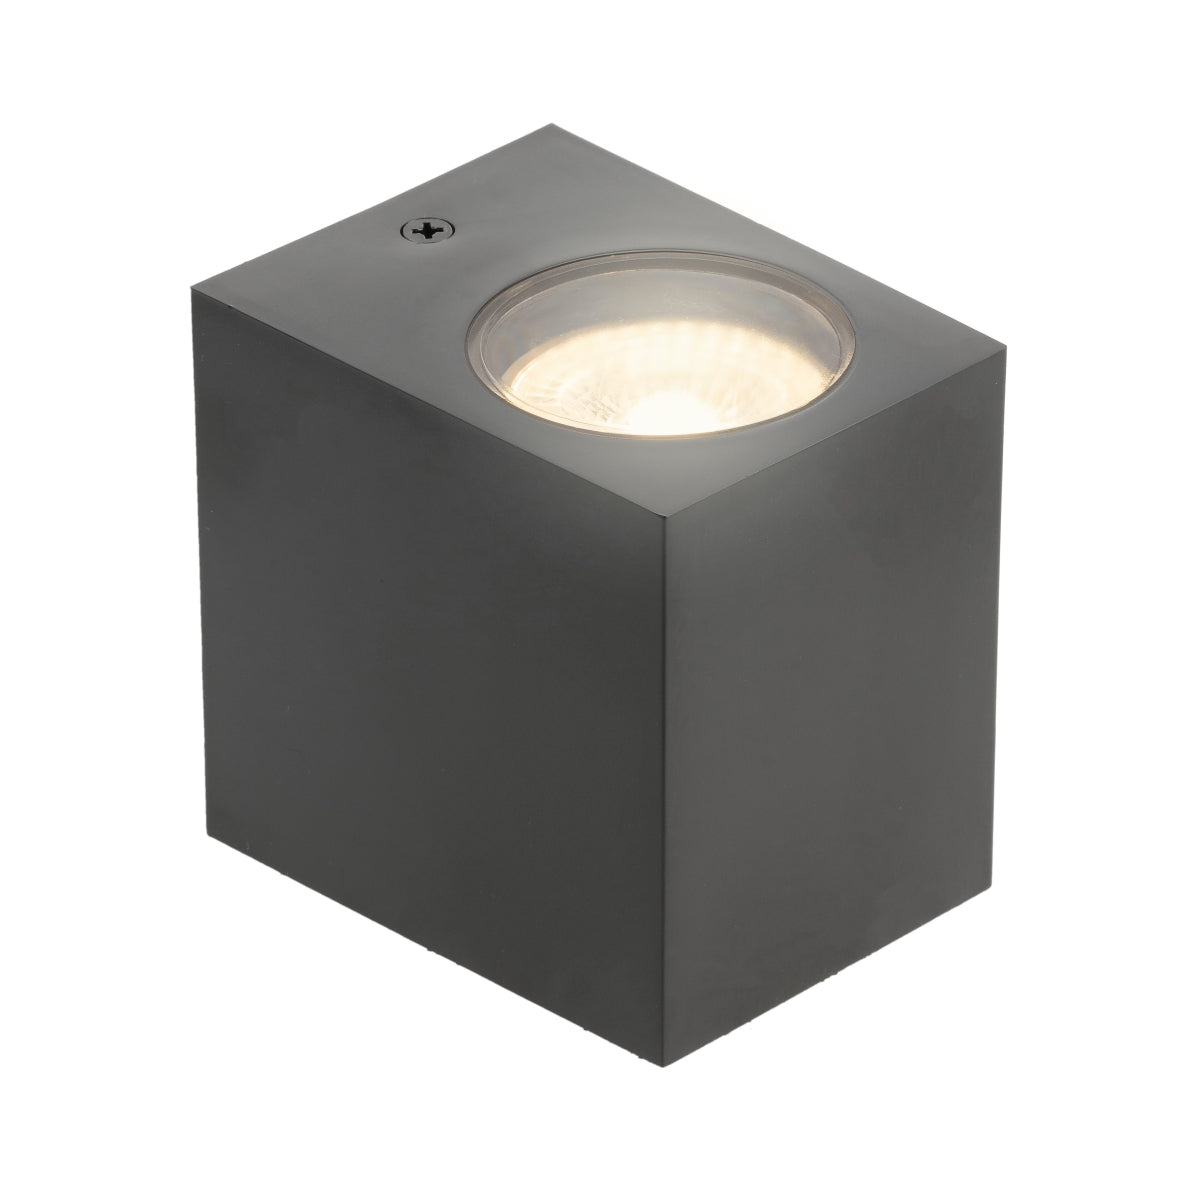 Our Eileen black wall mounted rectangle outdoor light would look perfect in a modern or more traditional home design. Outside wall lights can provide atmospheric light in your garden, at the front door or on the terrace as well as a great security solution. It is designed for durability and longevity with its robust material producing a fully weatherproof and water resistant light fitting.